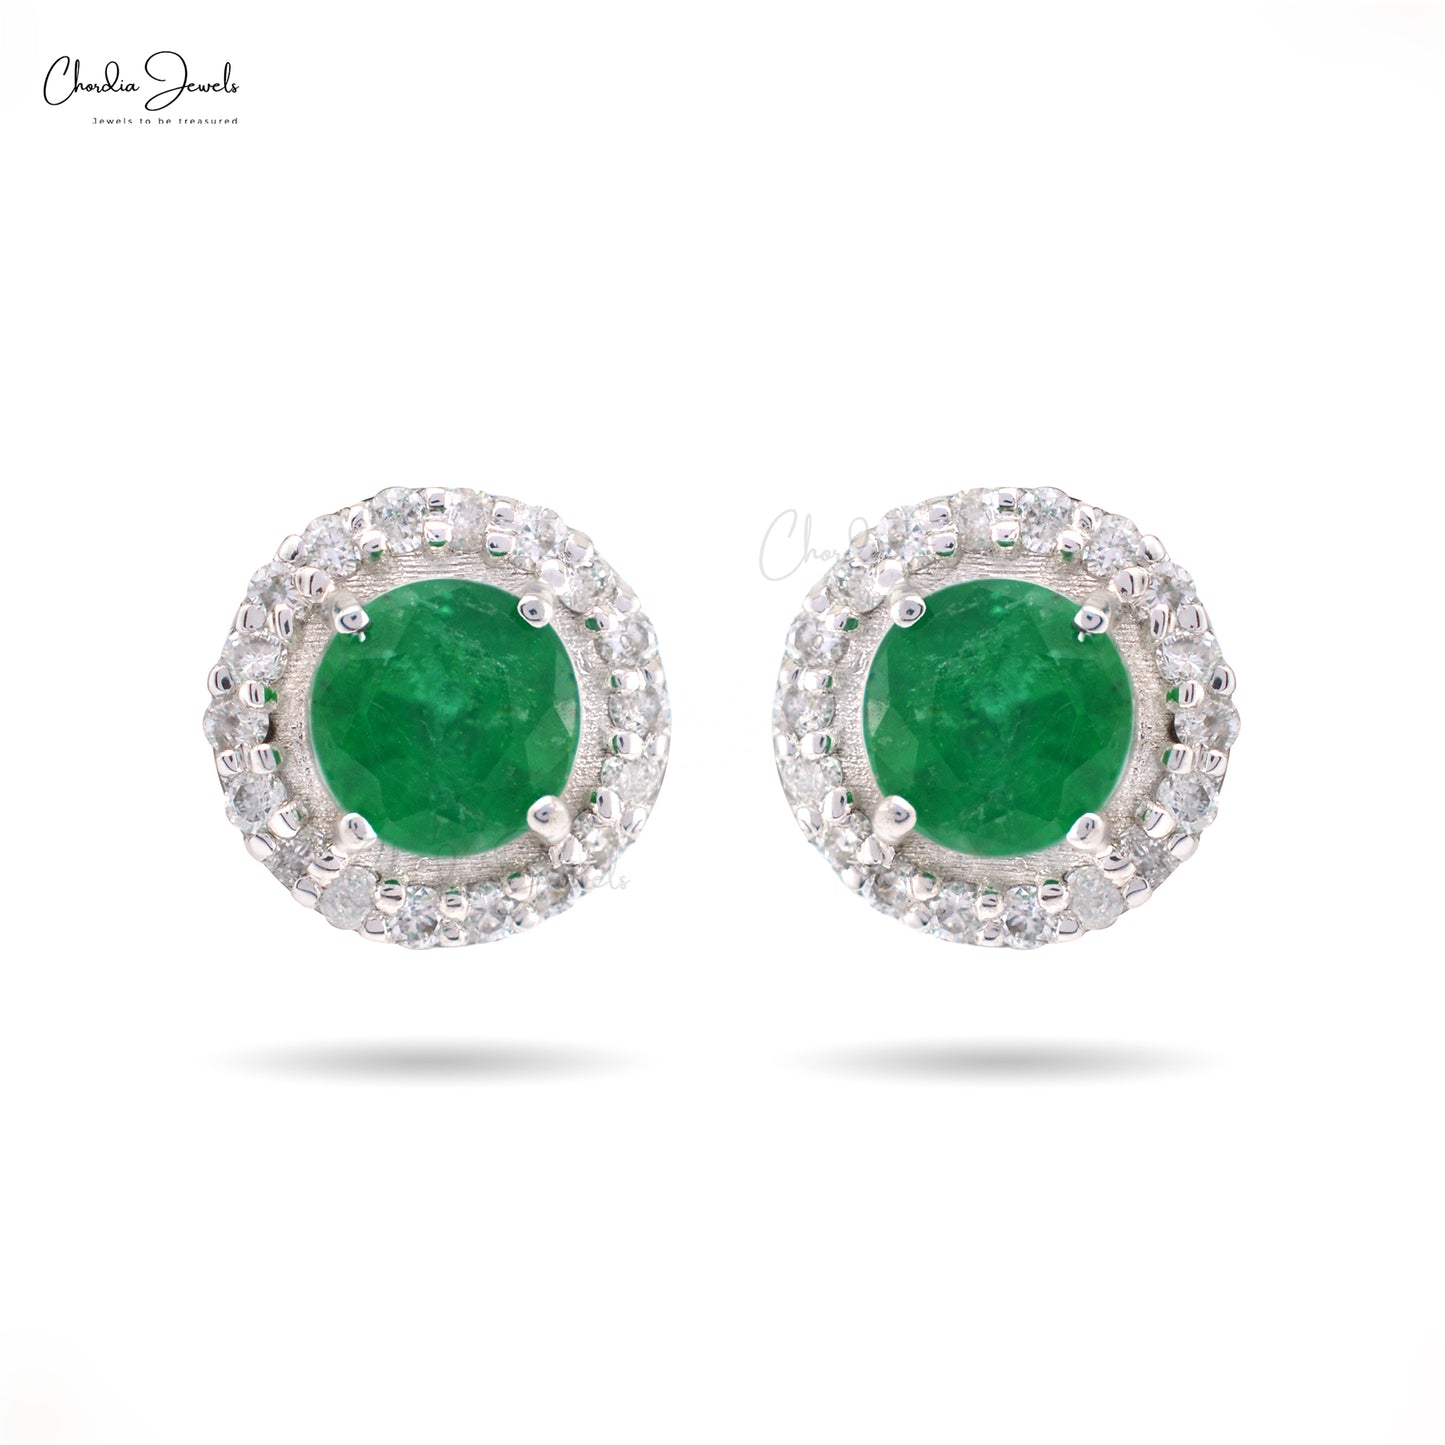 Natural Emerald Stud Earrings With Diamond Halo Solid 14k White Gold Dainty Earrings